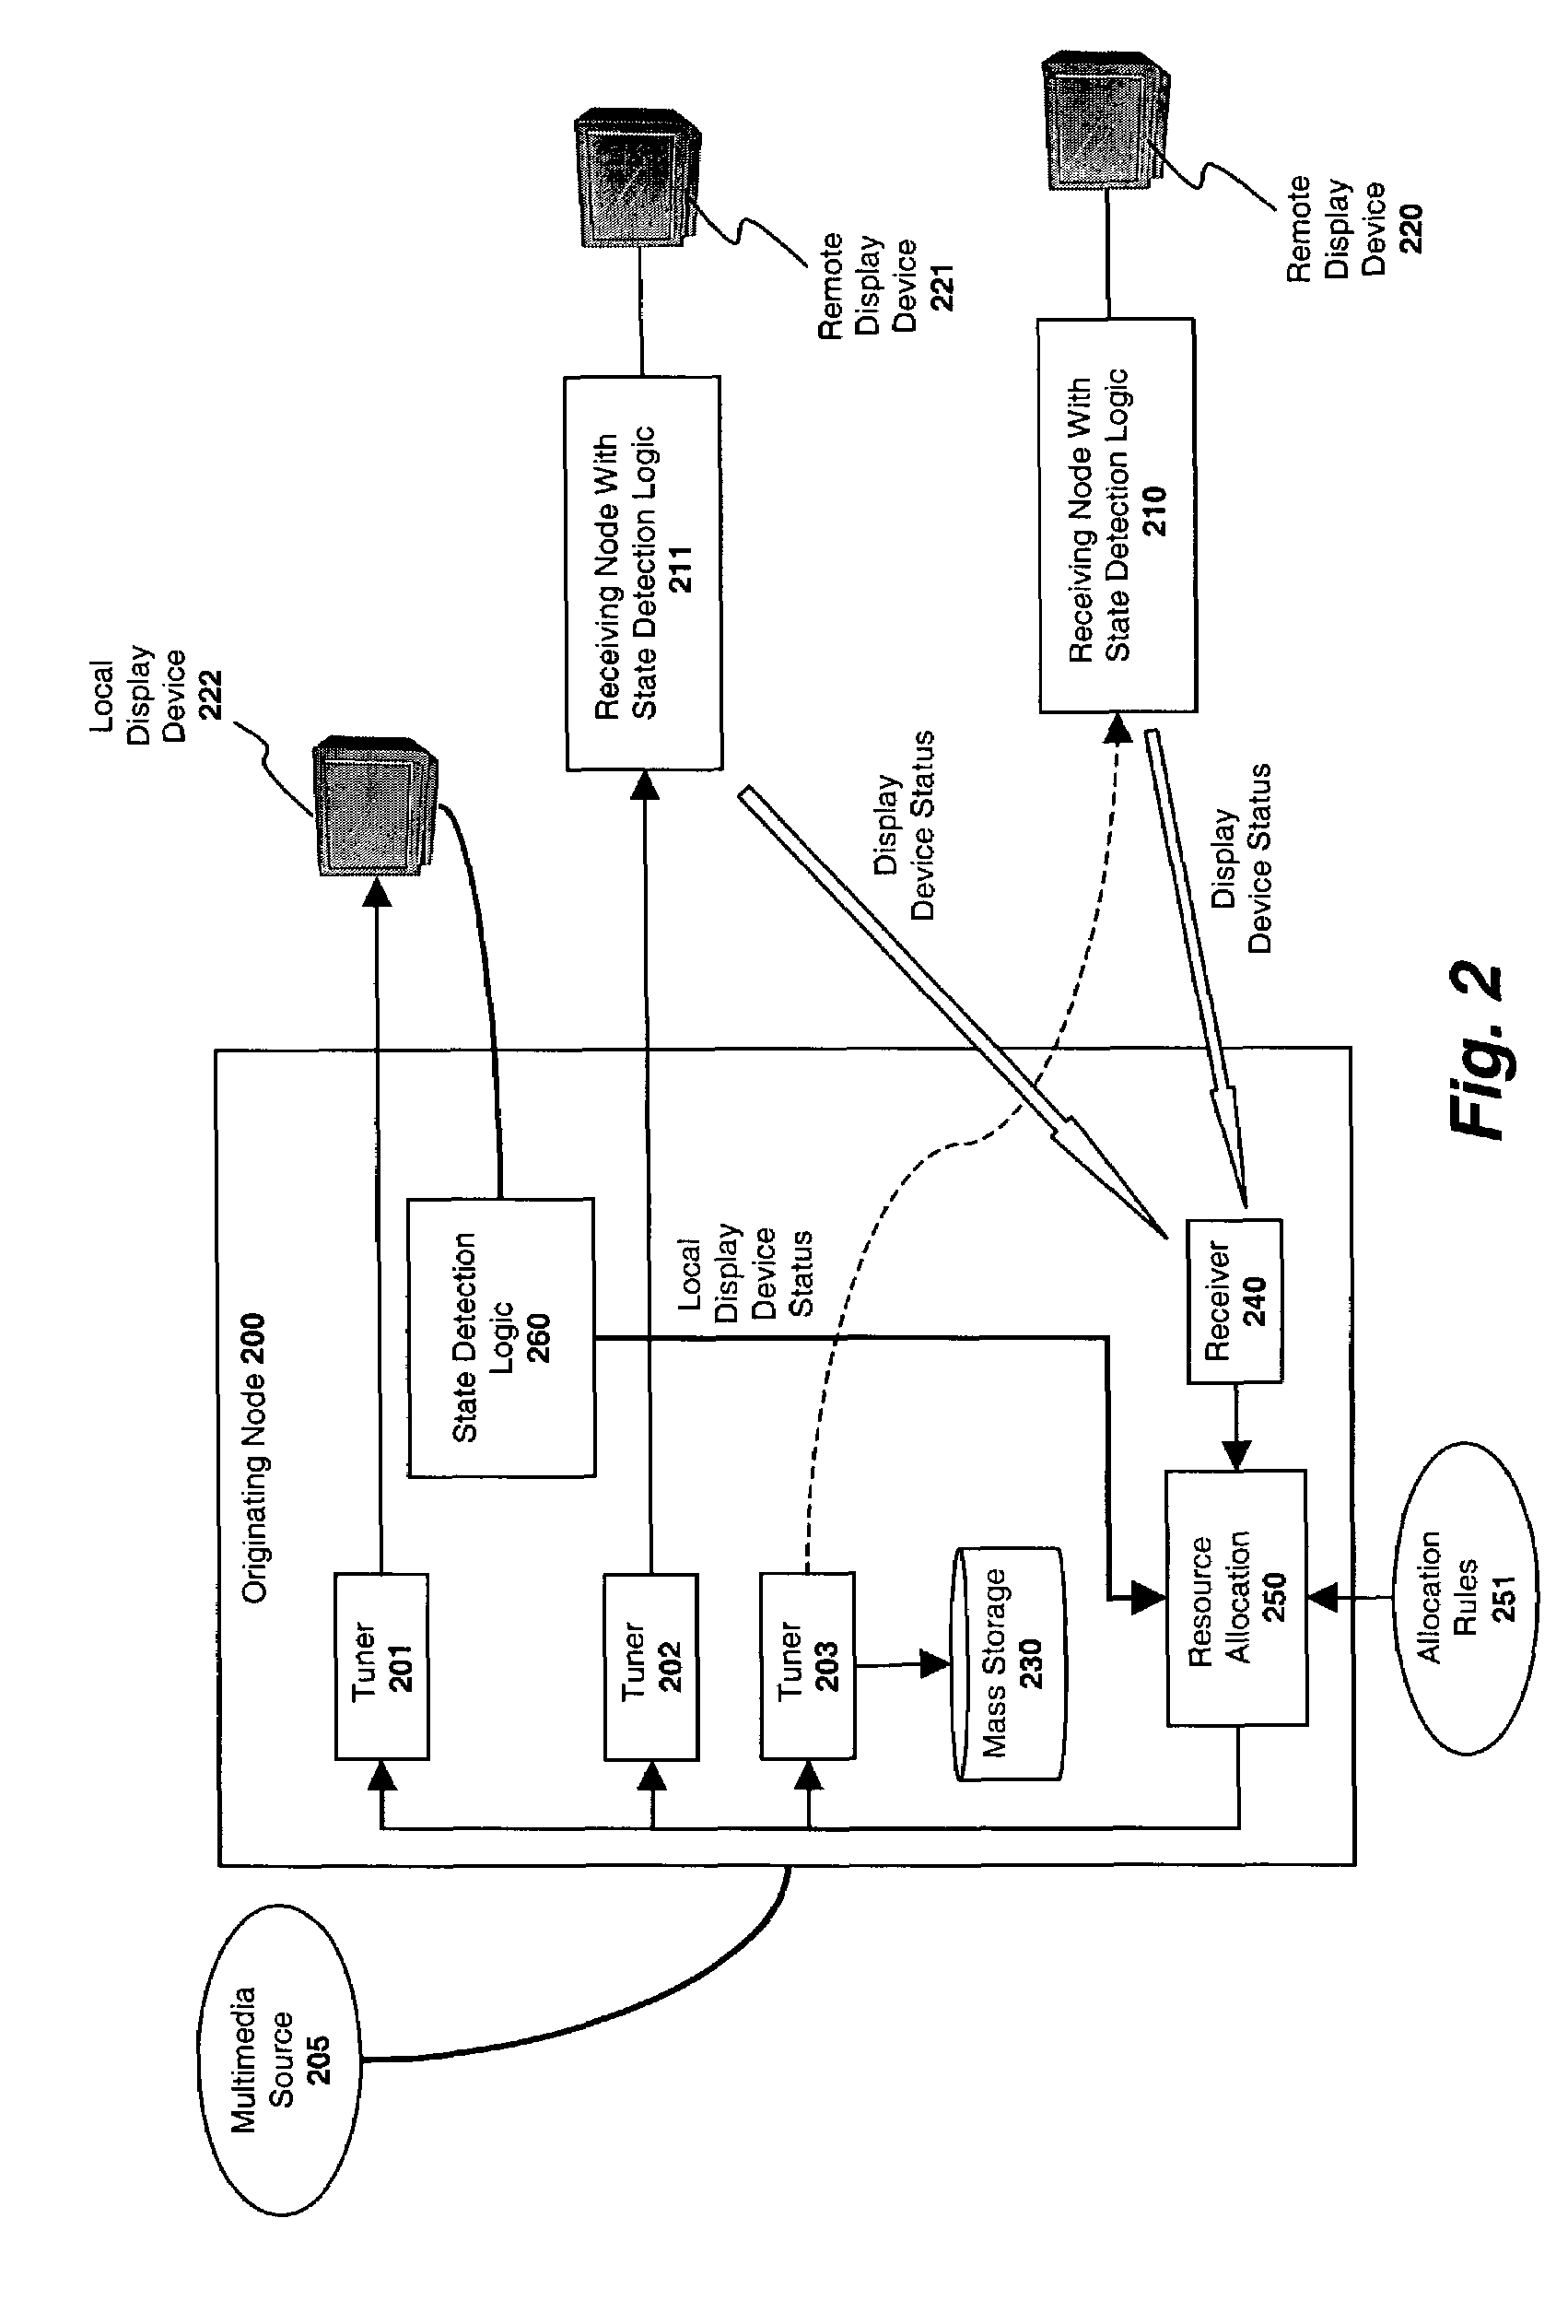 System and method for allocating resources across a plurality of distributed nodes